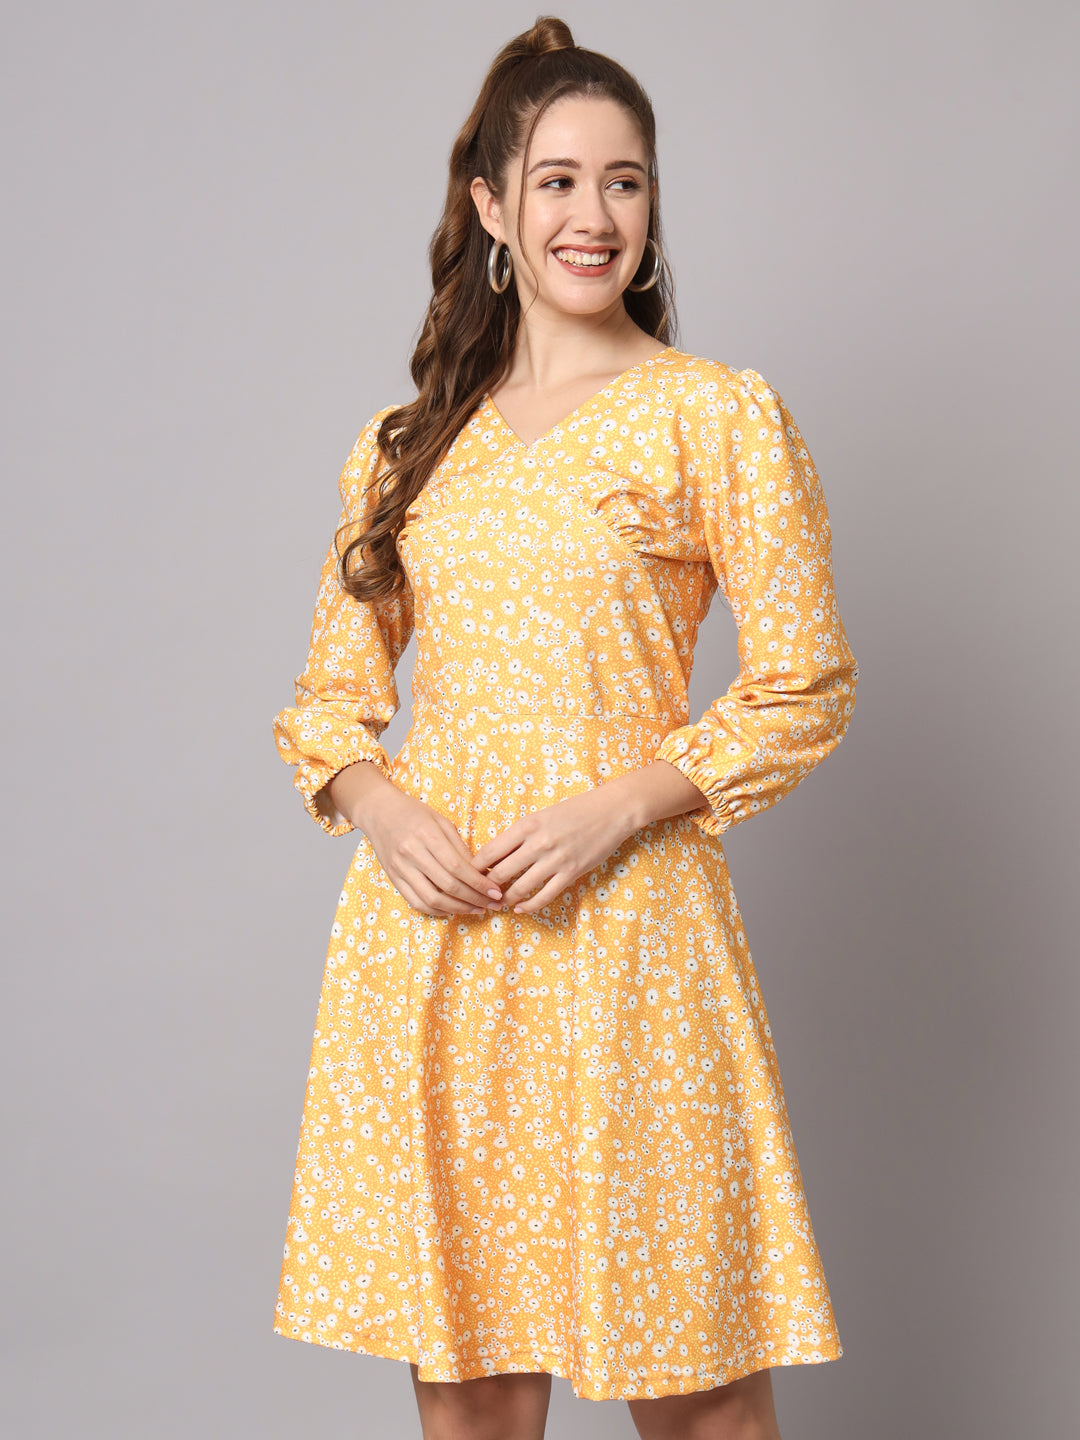 VredeVogel Women Fit and Flare Yellow Dress